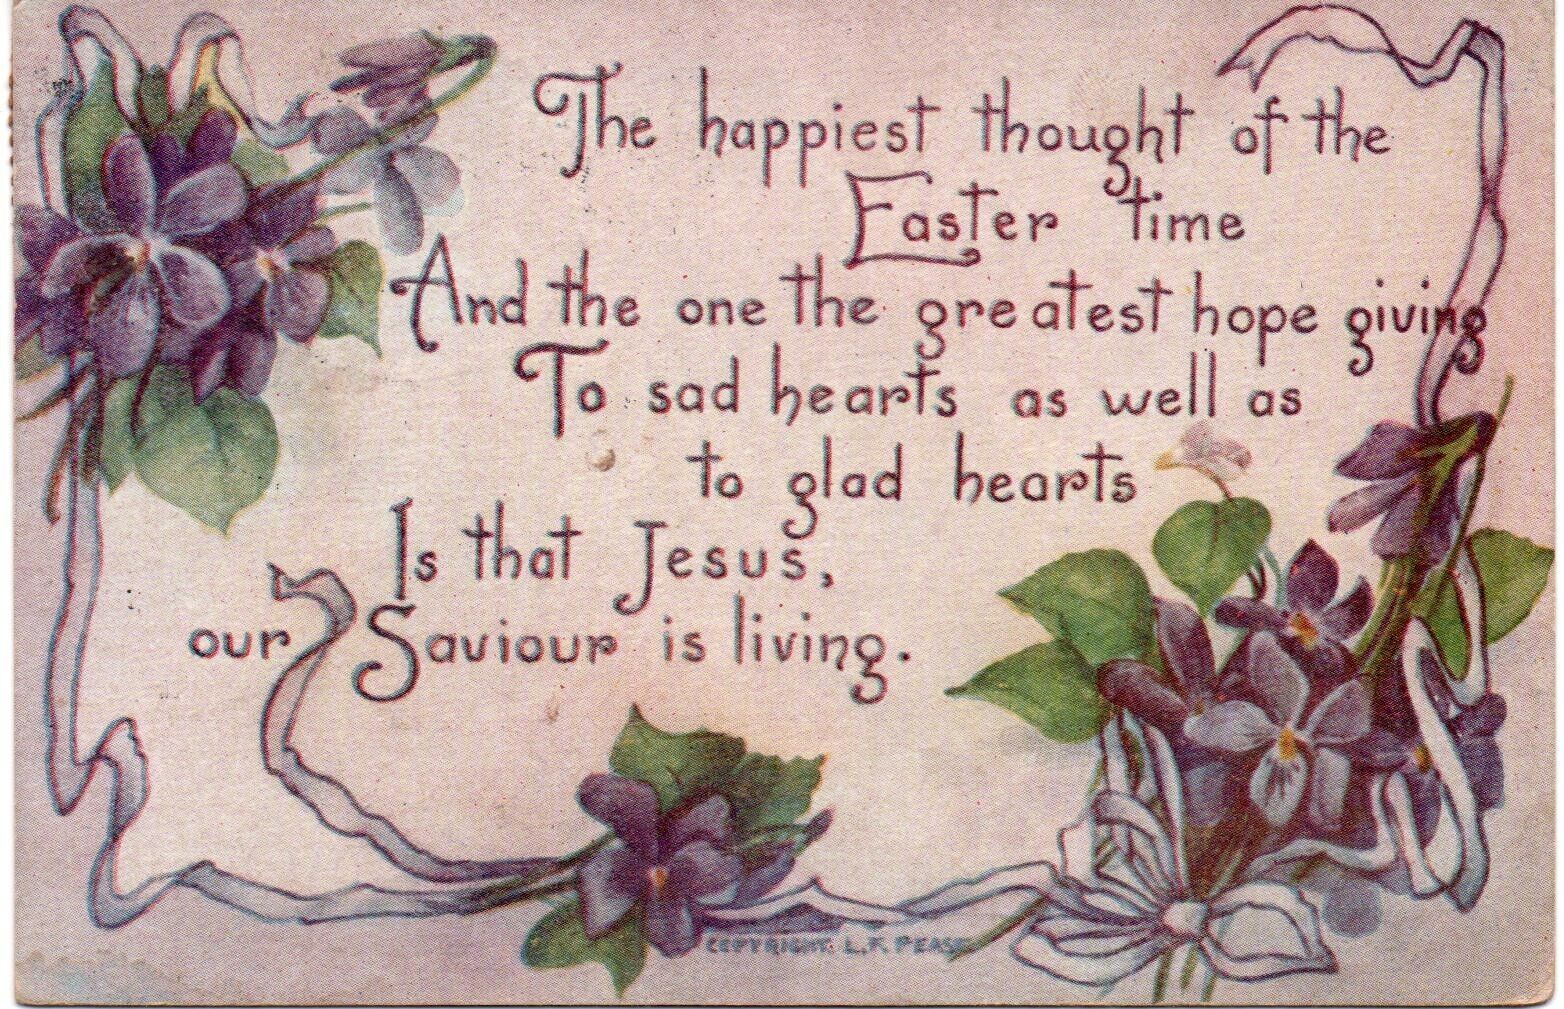 Vintage Easter Postcard 1910 Posted Religious Saying, Purple flowers L. F. Pease